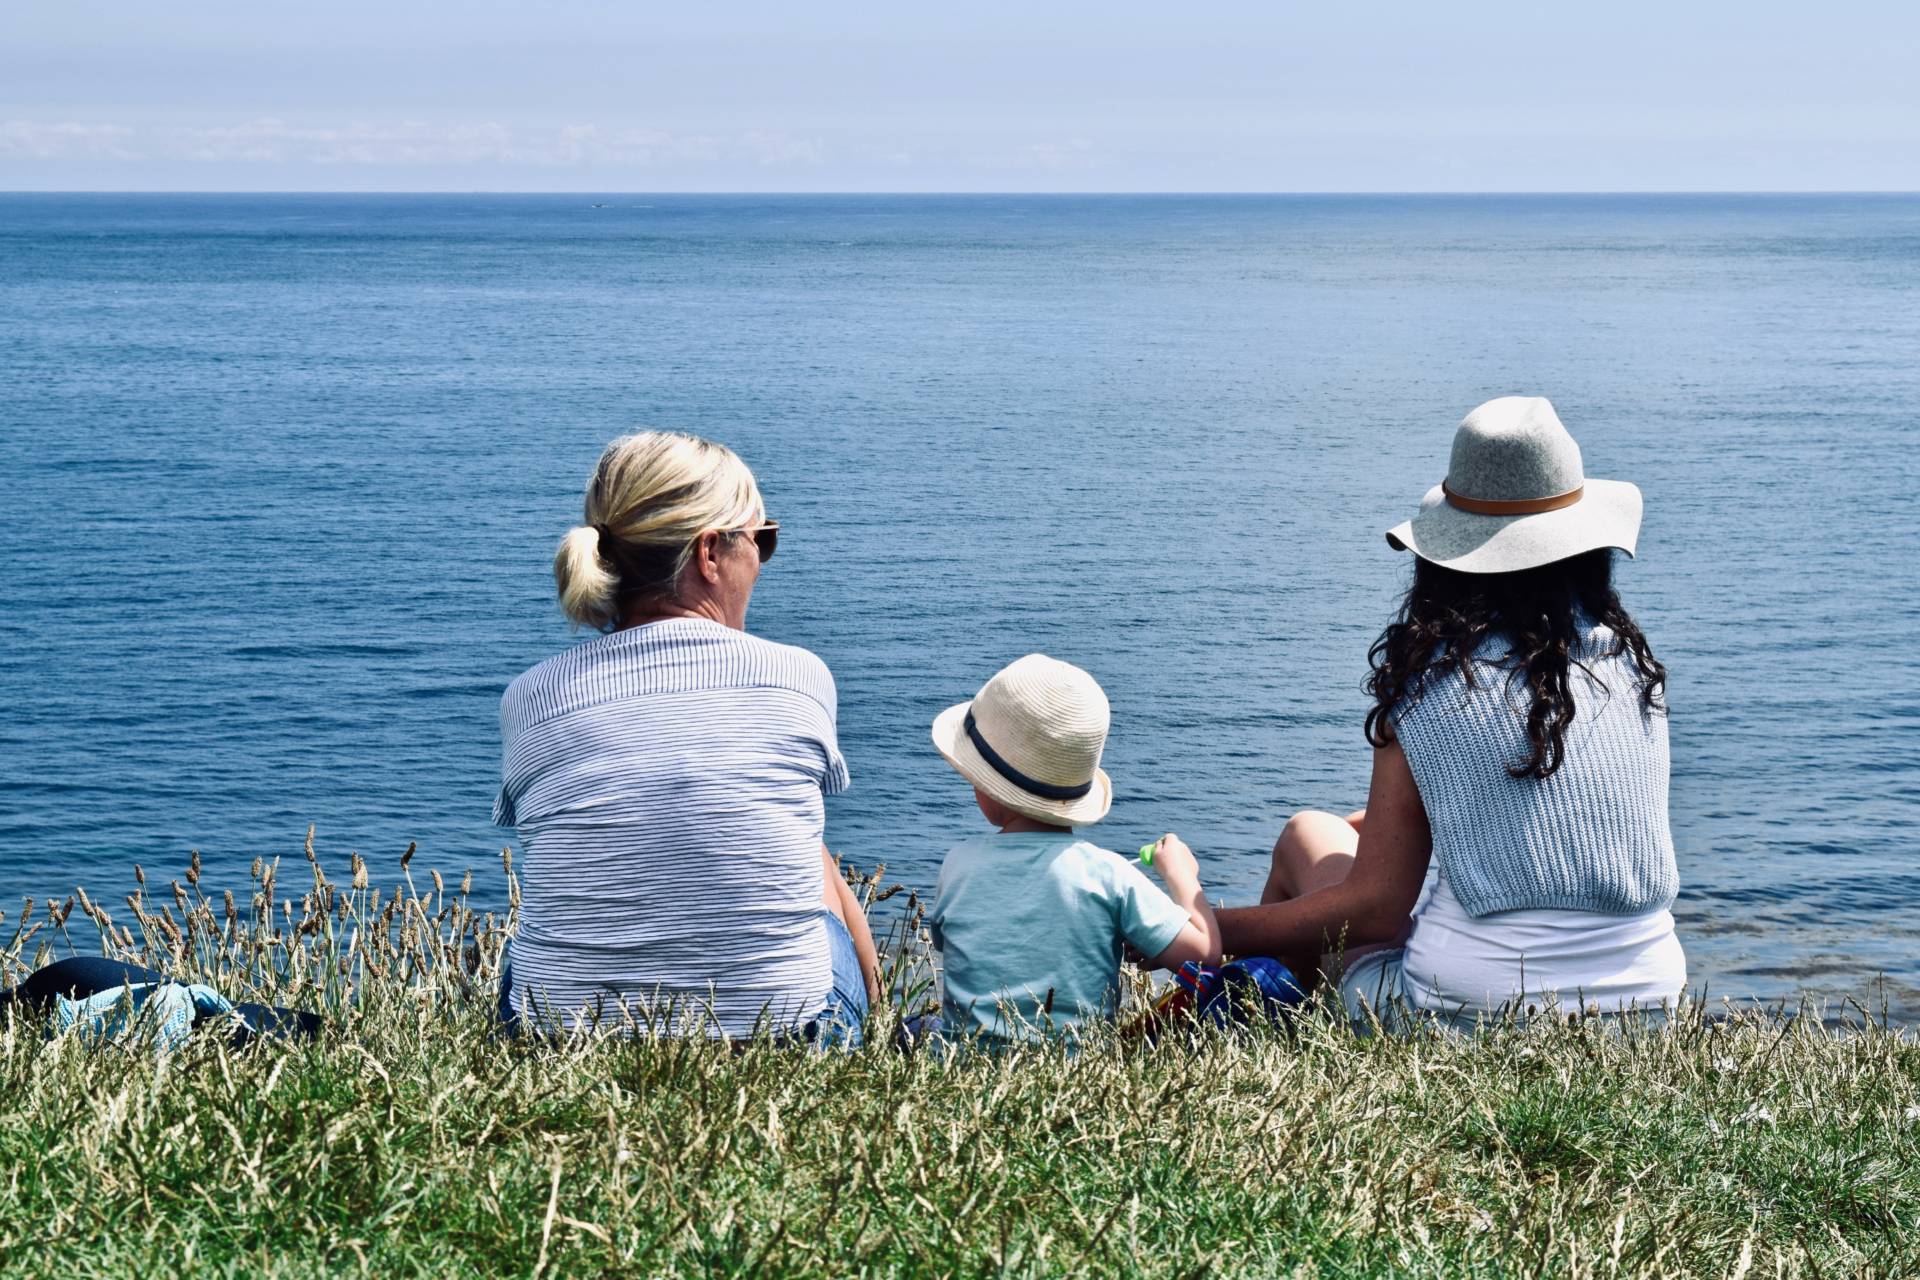 older woman, child and woman sat on grass looking out to sea.